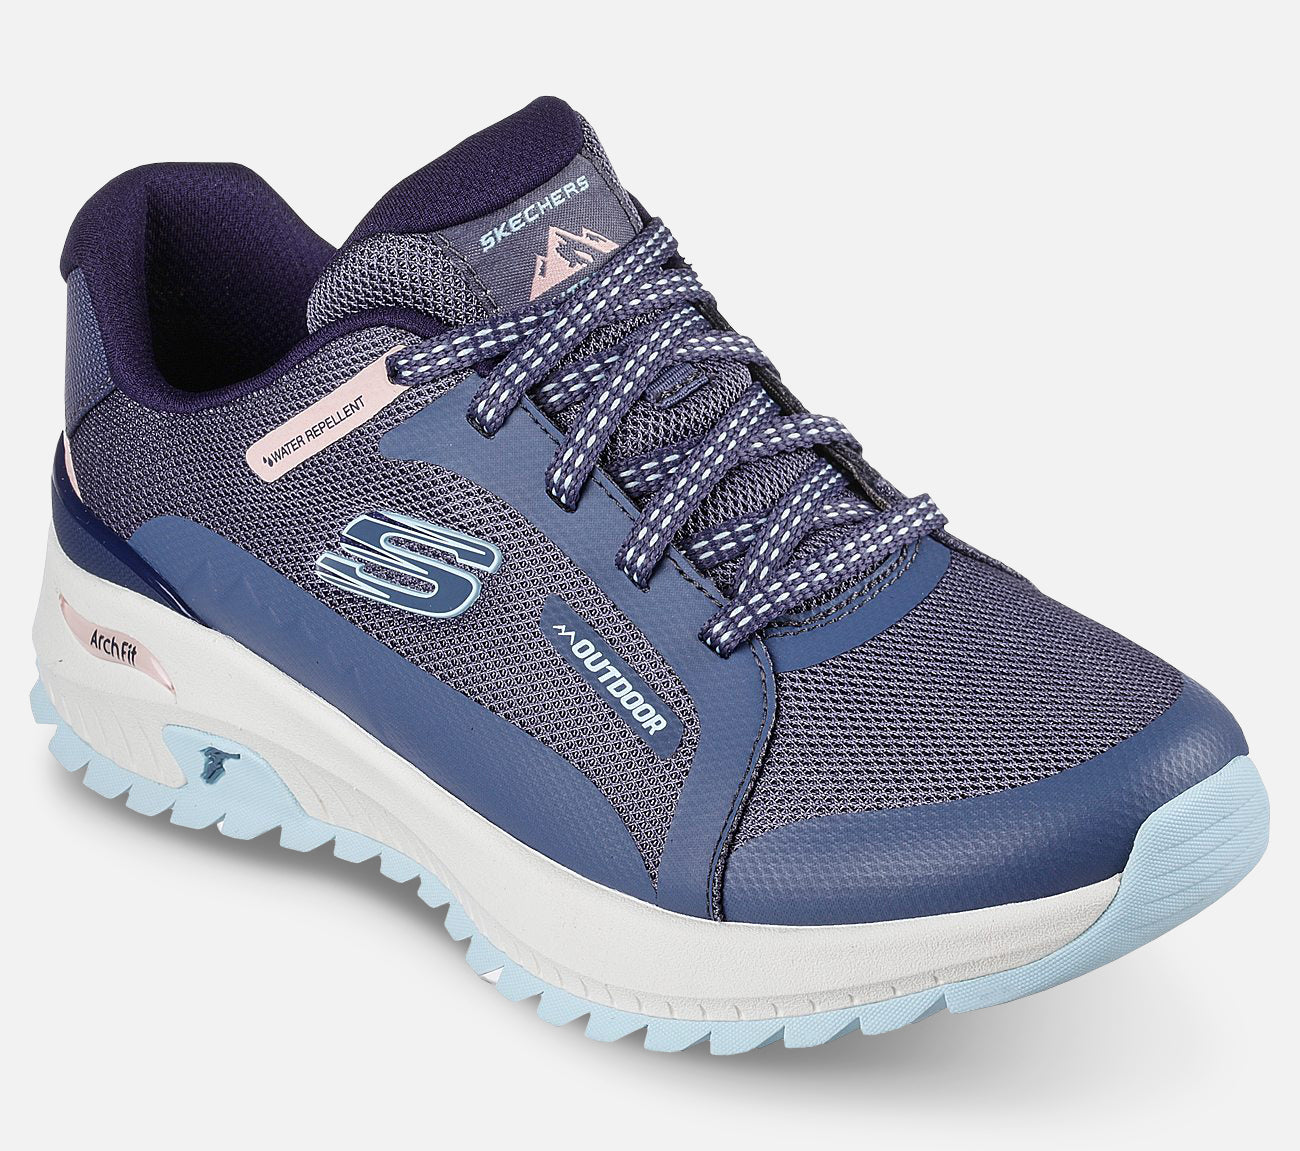 Arch Fit Discover - Water Repellent Shoe Skechers